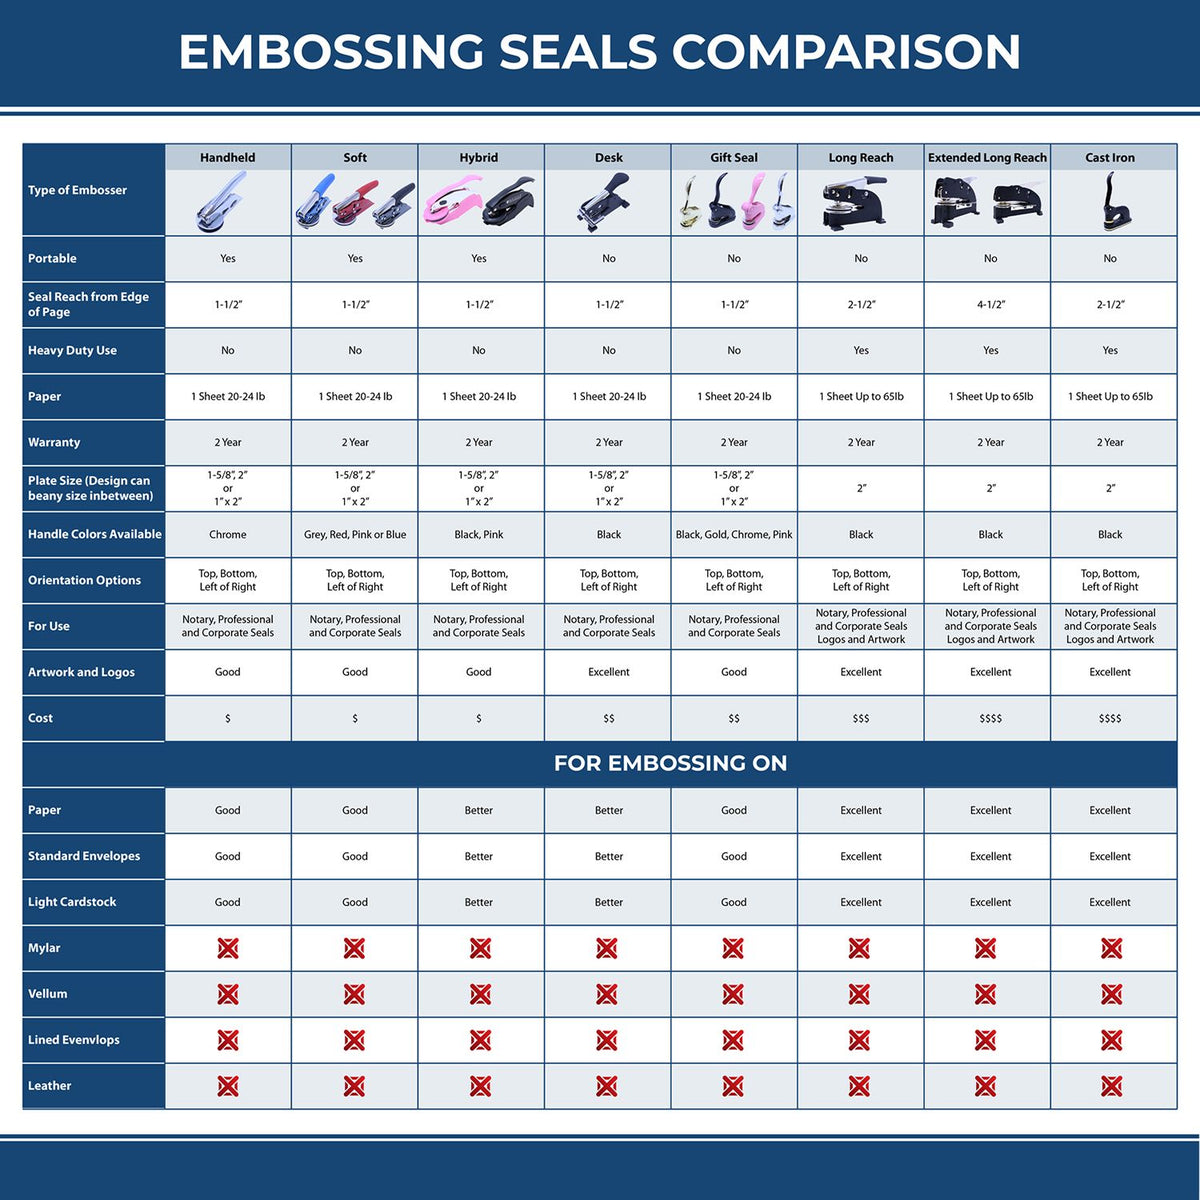 A comparison chart for the different types of mount models available for the Hybrid Oklahoma Land Surveyor Seal